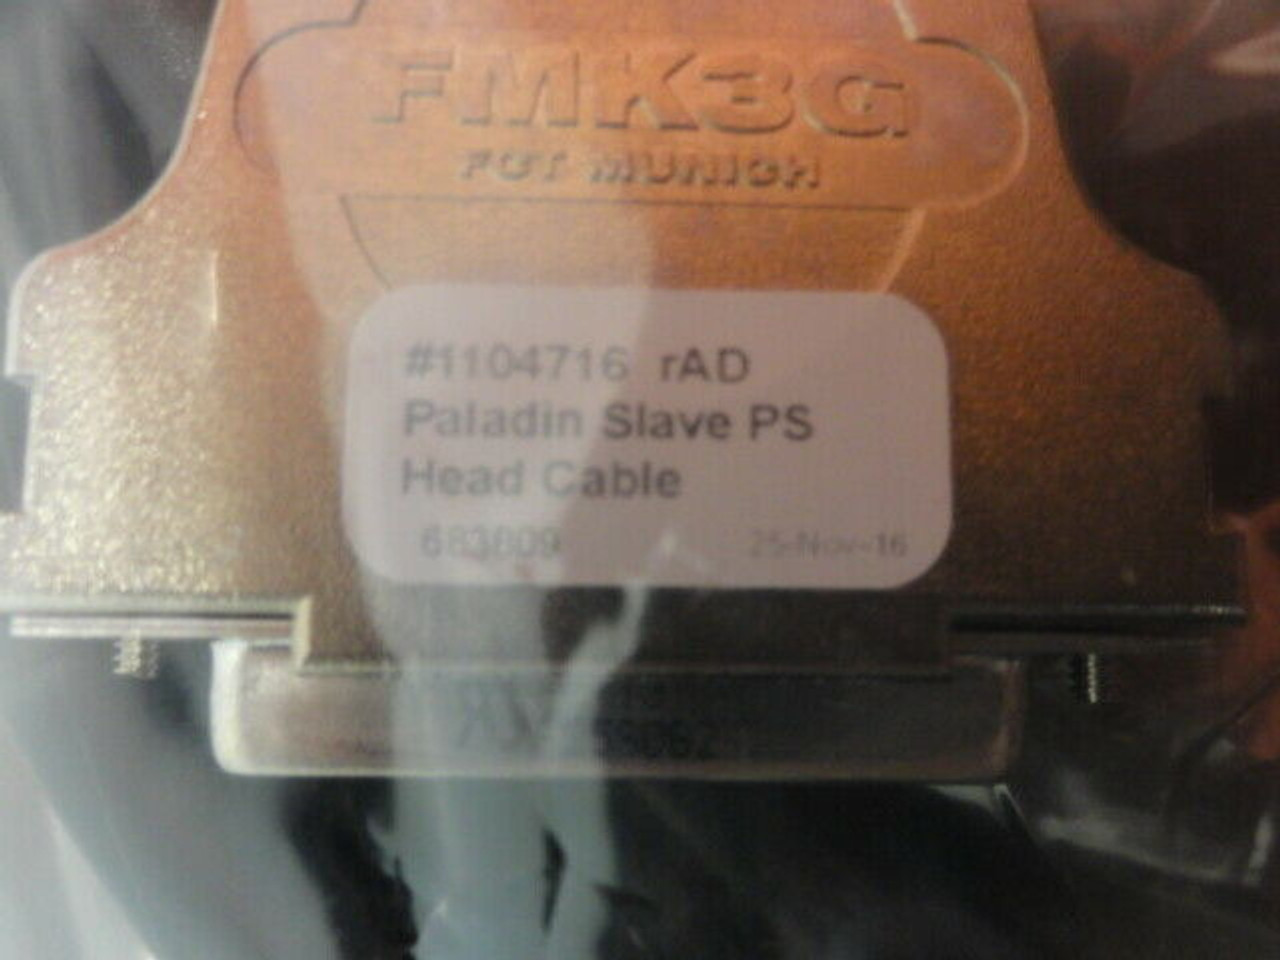 Paladin Slave PS Head Cable **NEW**